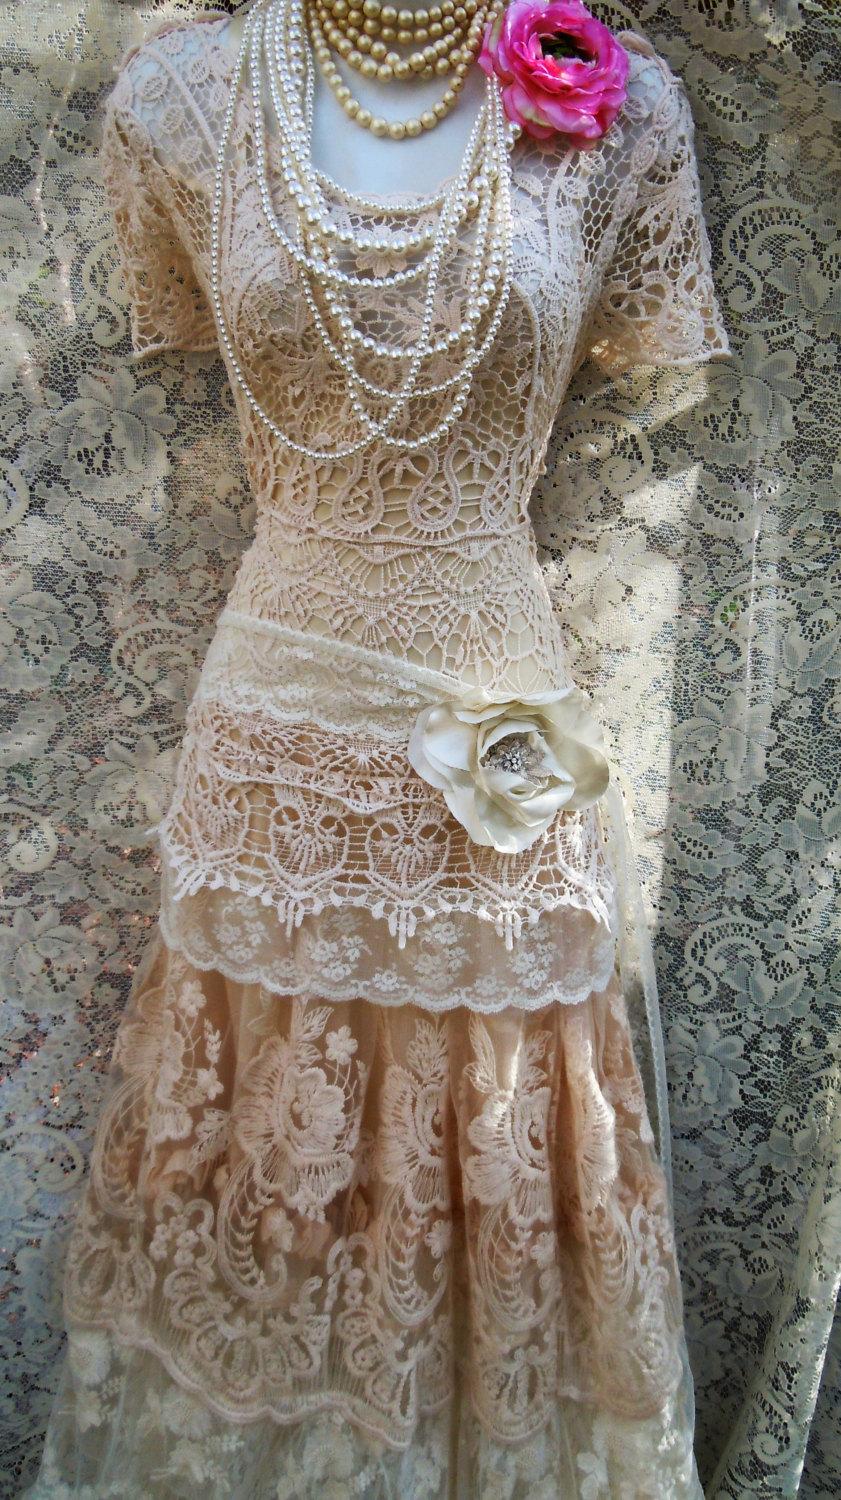 Hochzeit - Boho lace dress wedding cream crochet  tulle tiered   flapper  vintage  bride outdoor  romantic small  by vintage opulence on Etsy